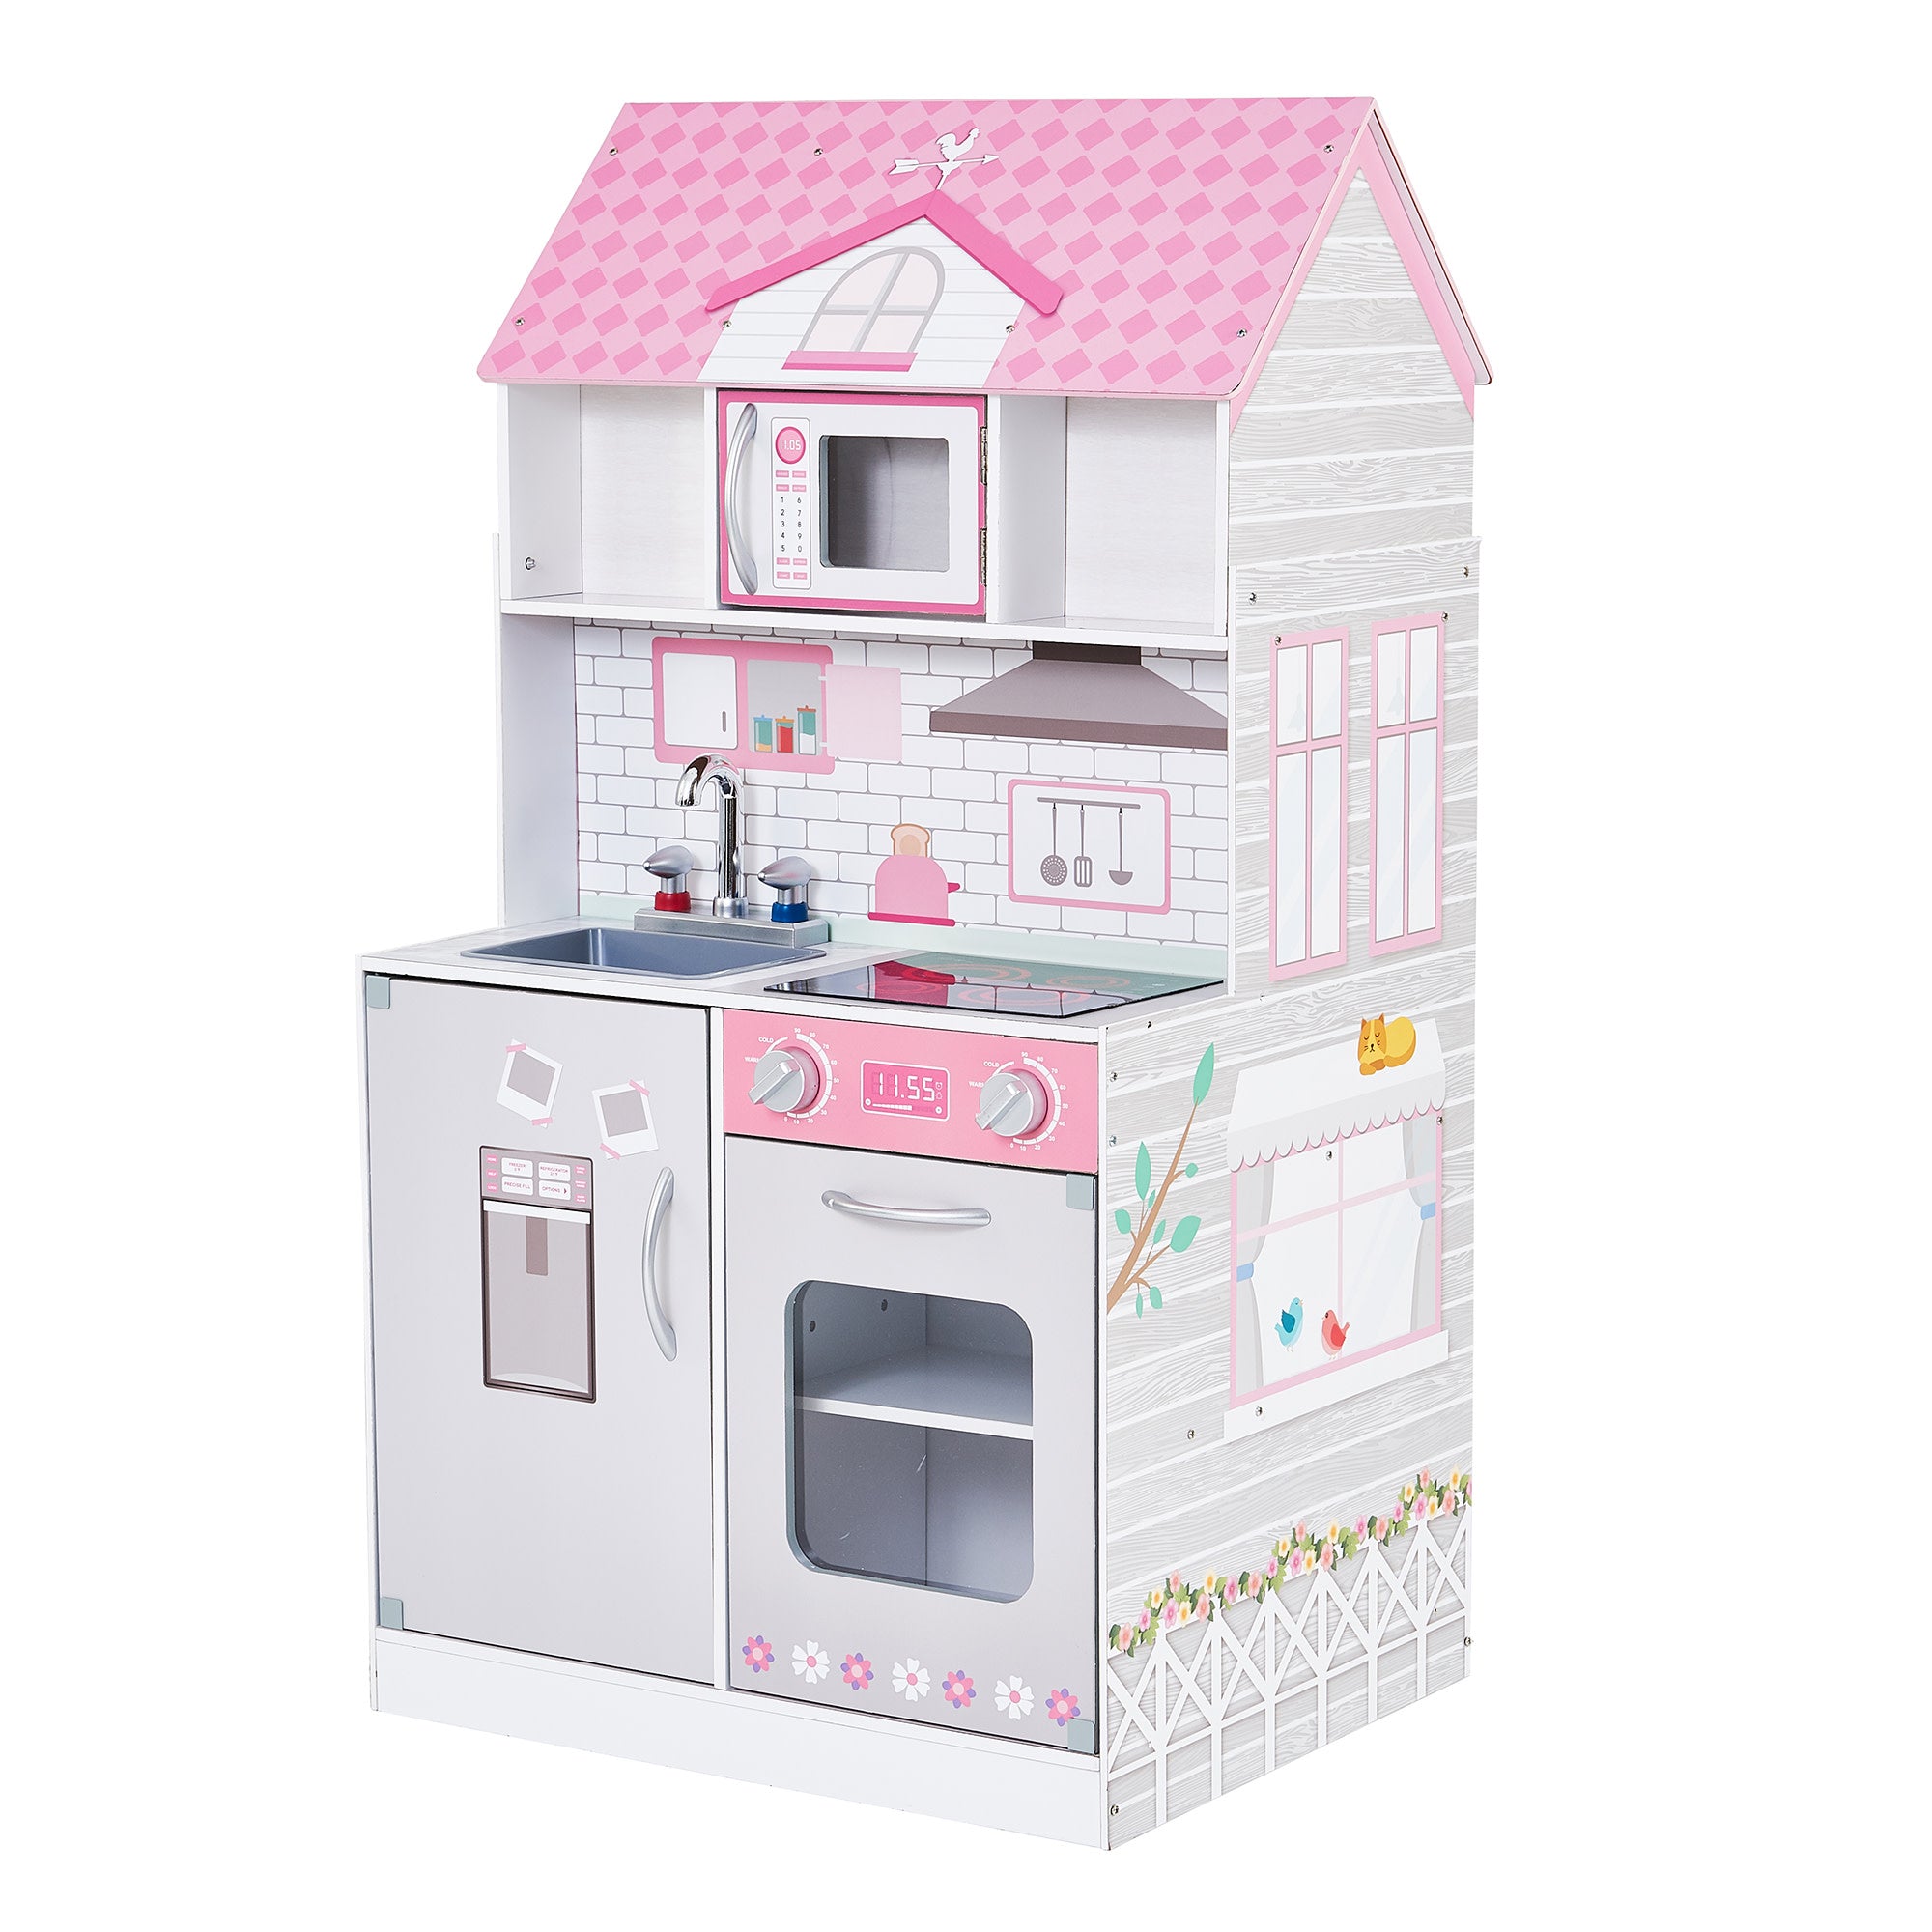 Teamson Kids Ariel 2-in-1 Double-Sided Play Kitchen with Accessories and Furnished Dollhouse for 12" Dolls, Pink